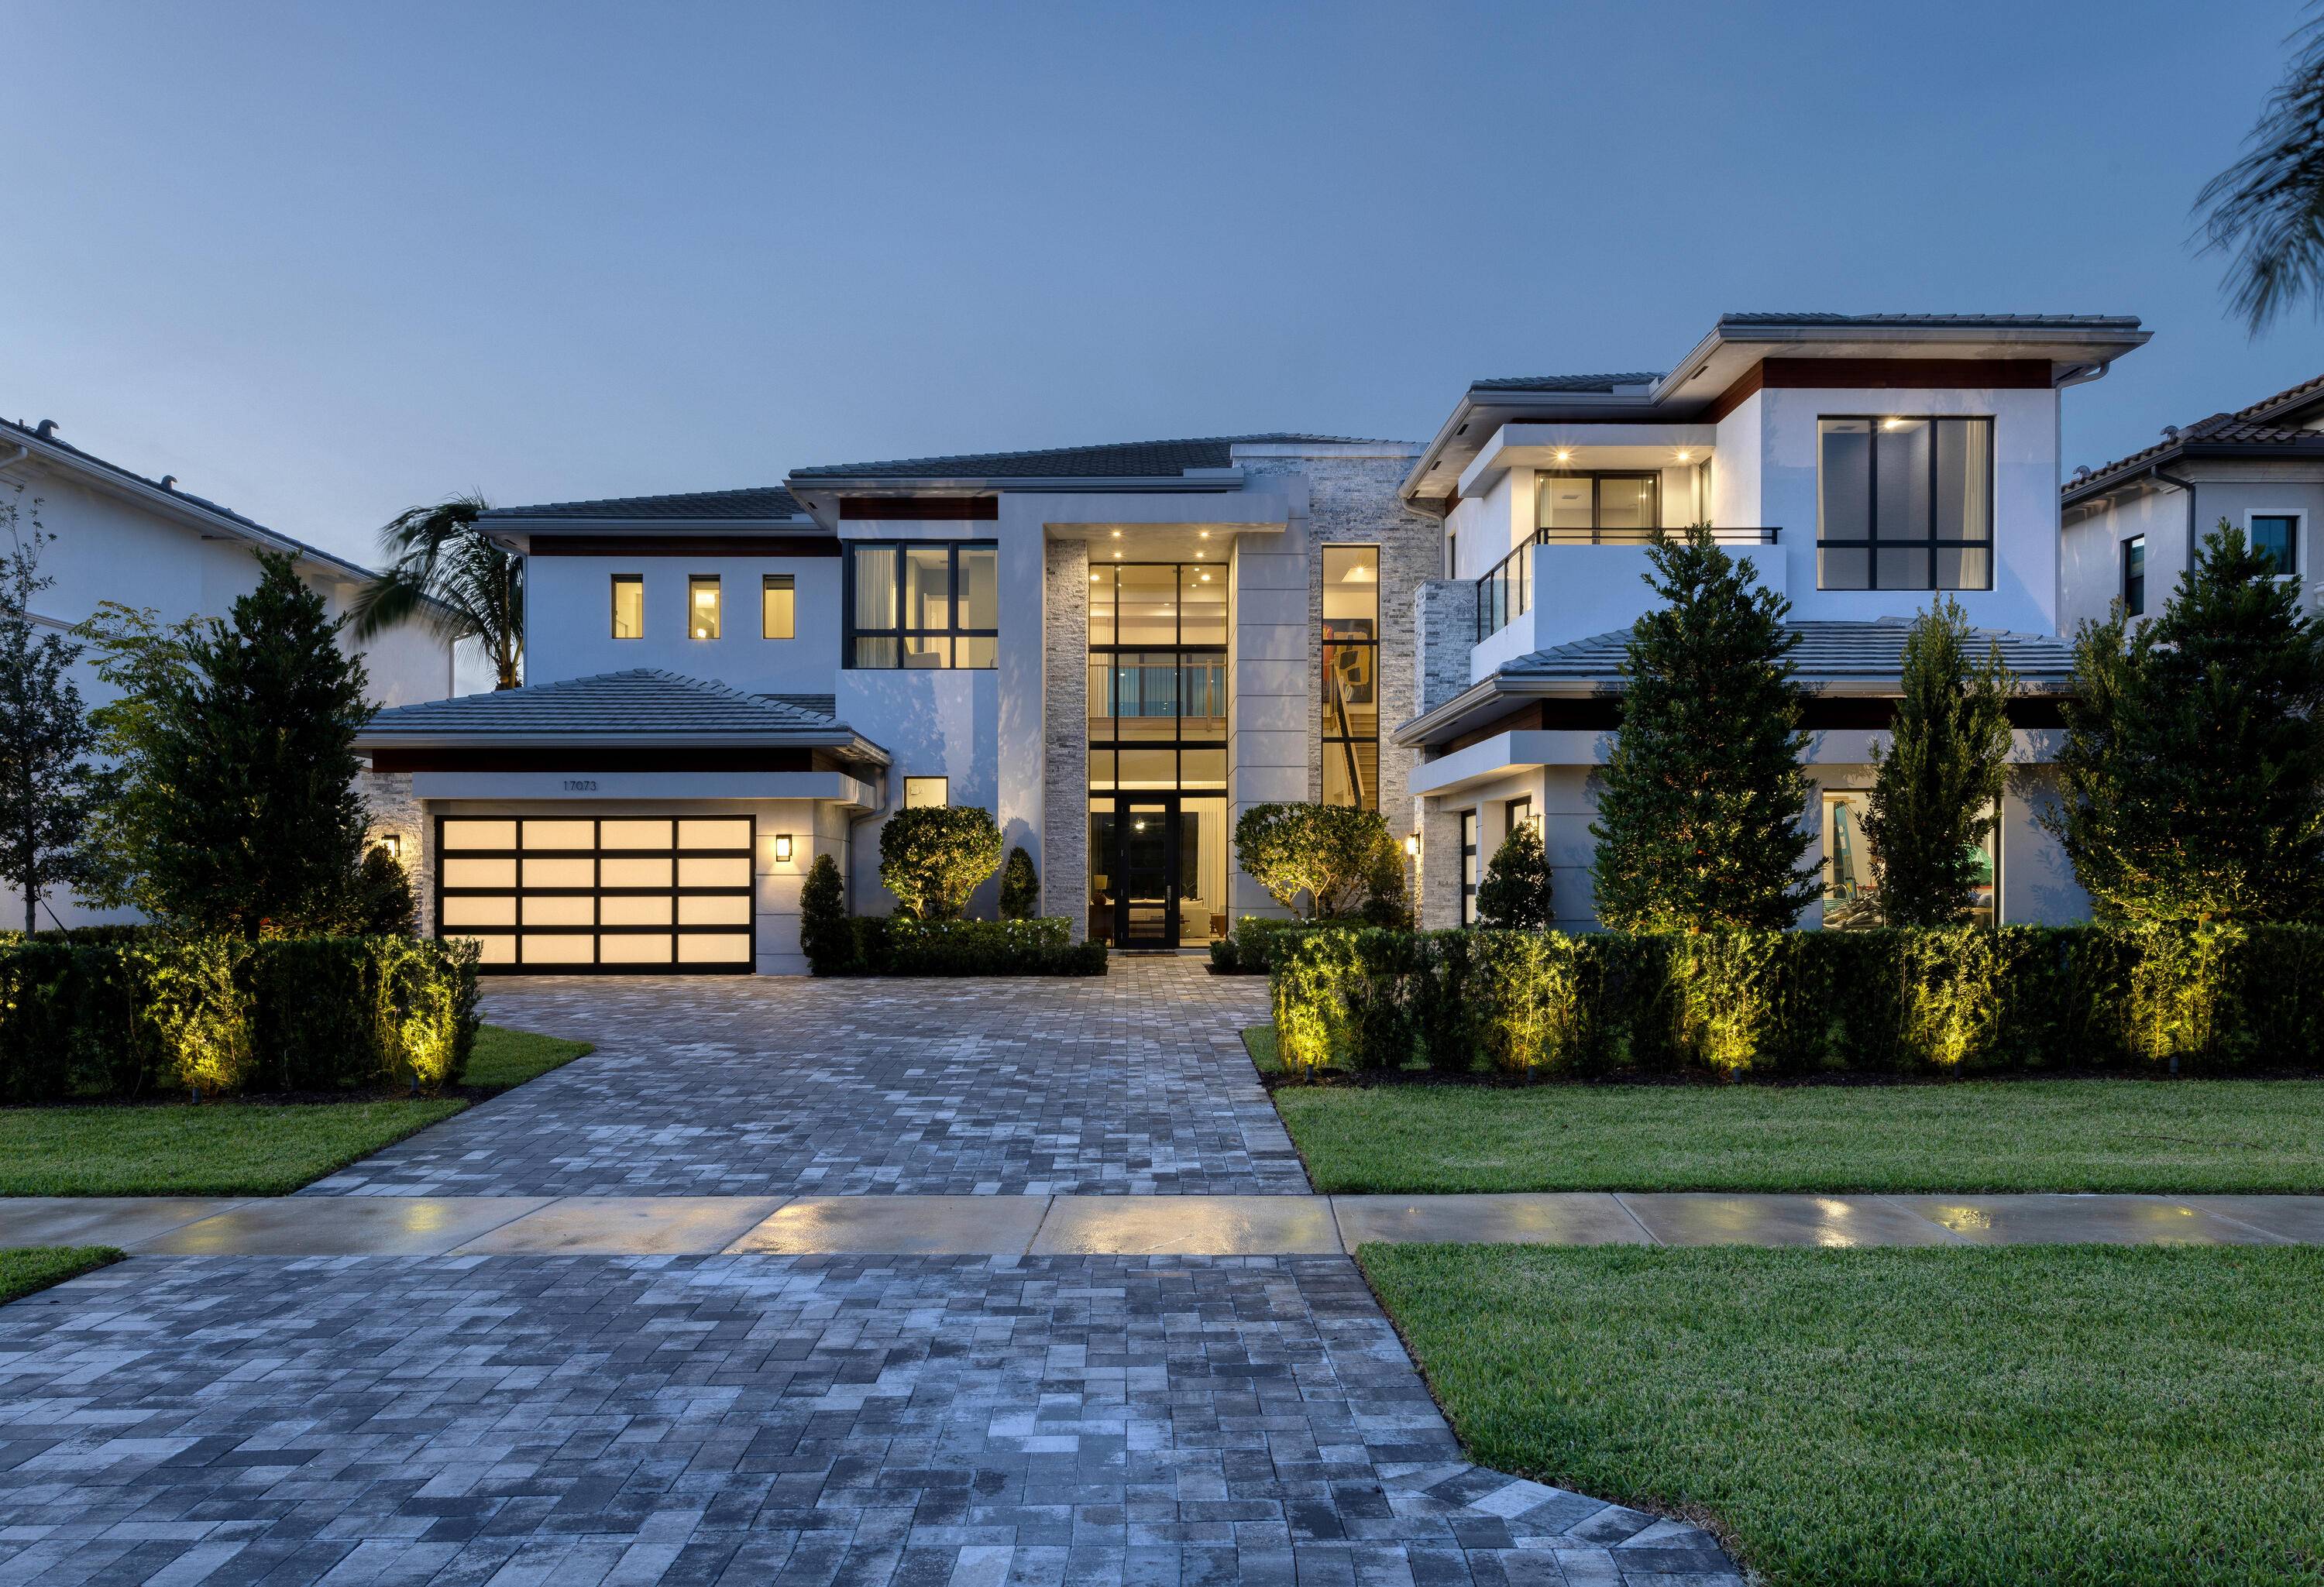 This Vanderbilt Grand model, the largest offered in Boca Bridges, was constructed by the illustrious GL Homes in 2022.